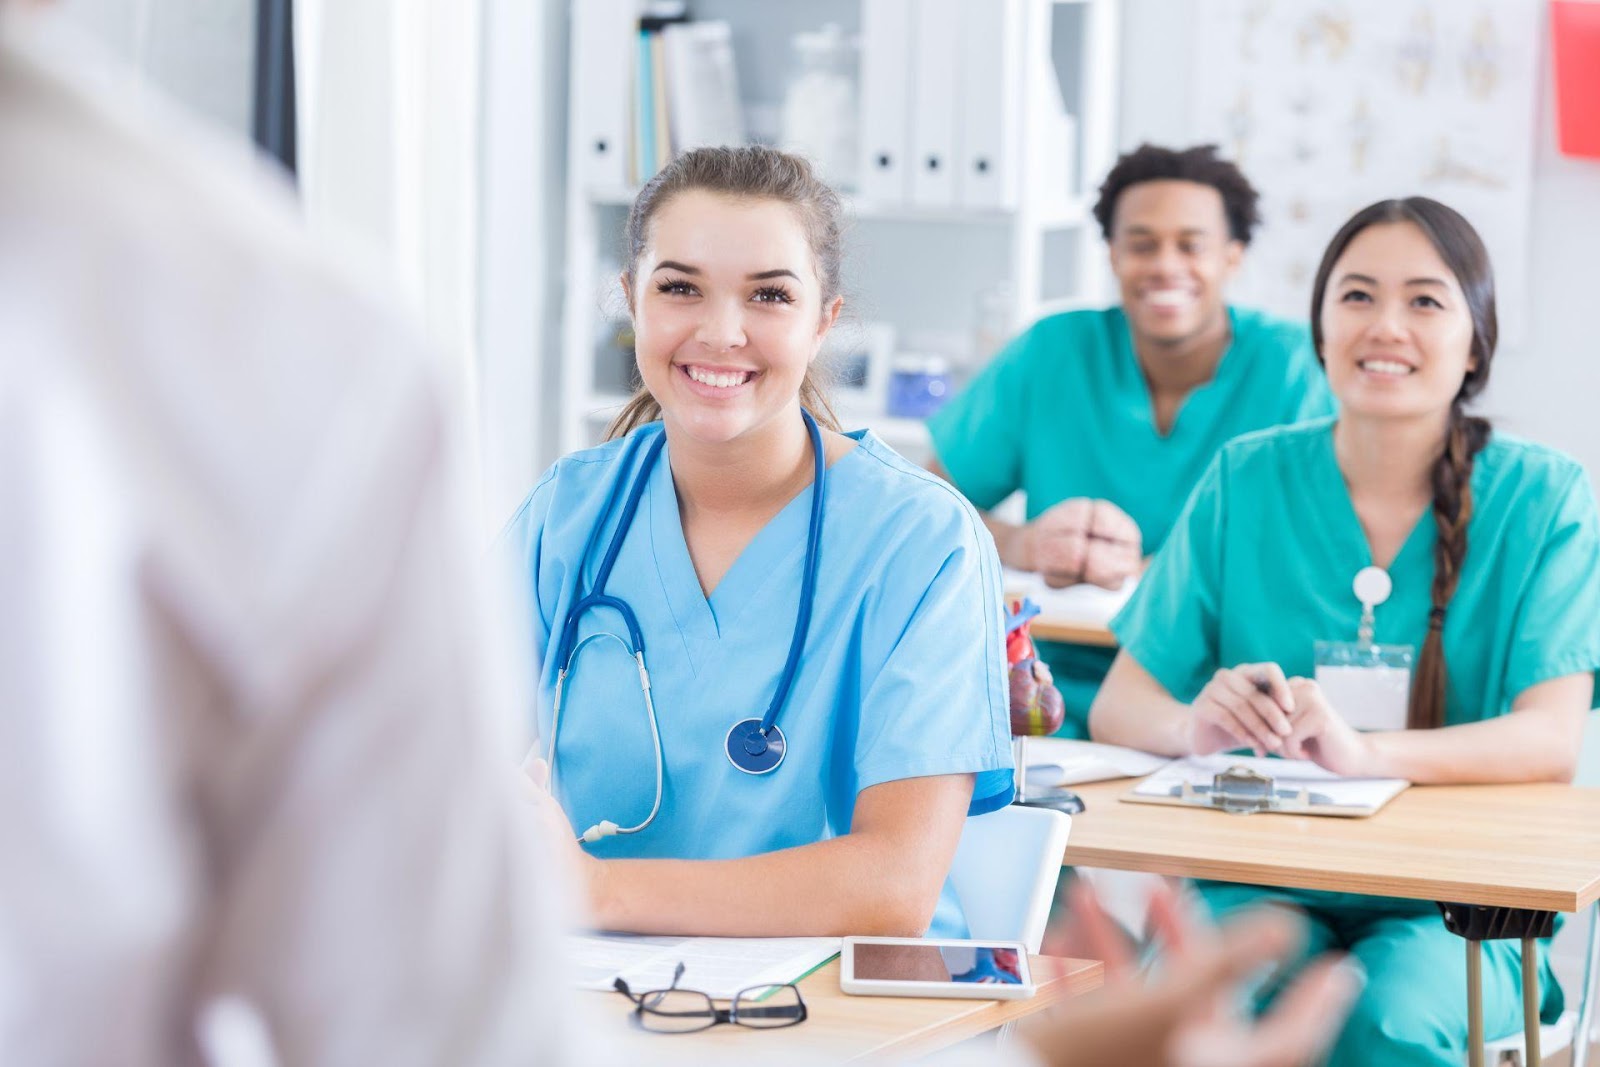 <strong>10 Tips To Improve Your Chances of Getting Into Nursing School</strong>